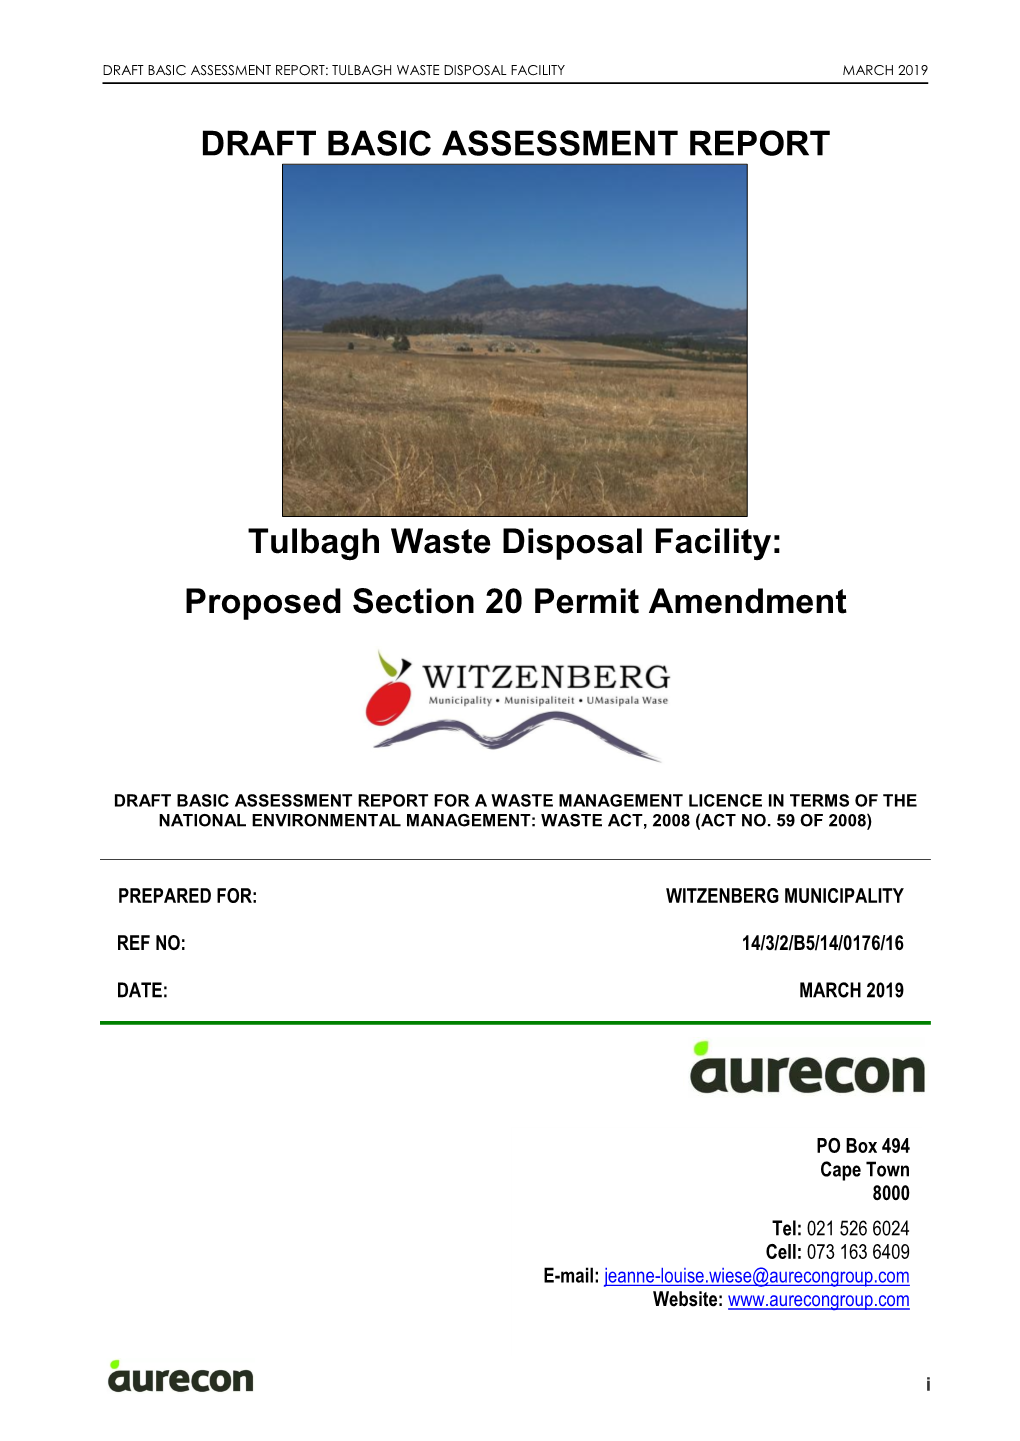 DRAFT BASIC ASSESSMENT REPORT Tulbagh Waste Disposal Facility: Proposed Section 20 Permit Amendment